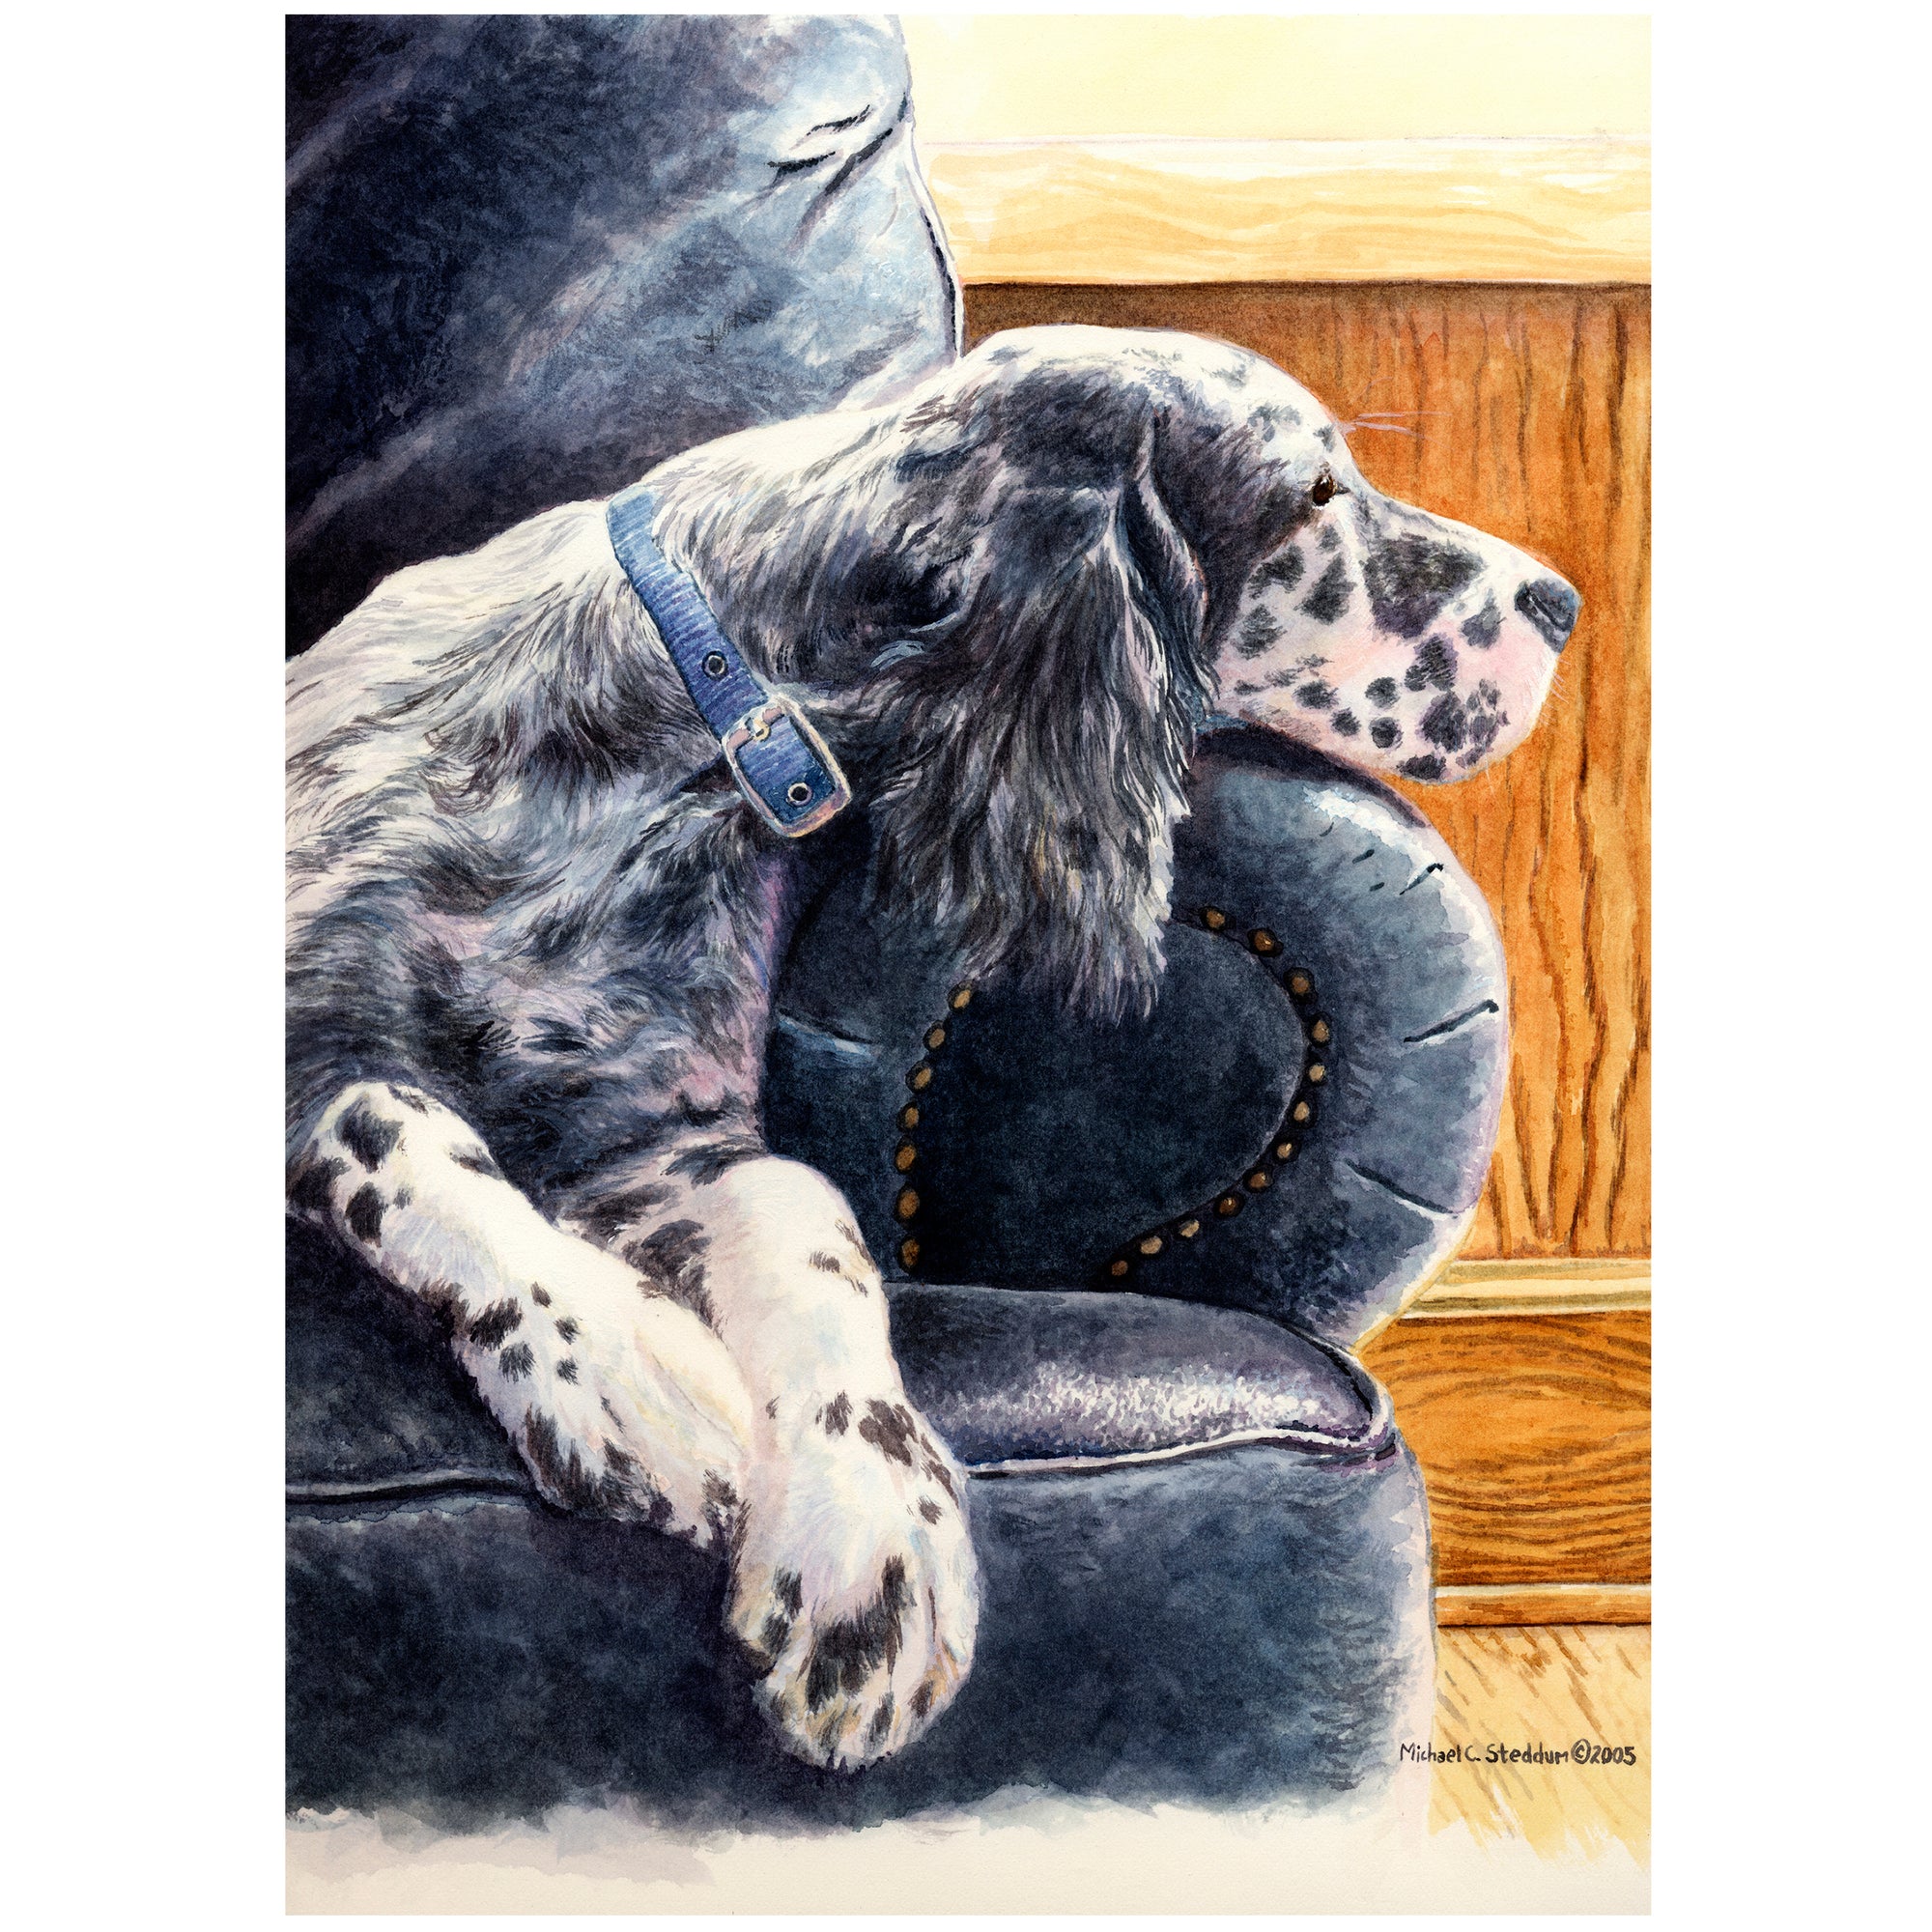 English Setter Art Reproduction Print – Couch Potato by Michael Steddum - Limited Edition Signed and Numbered English Setter Art Print - Ideal for a English Setter Gift